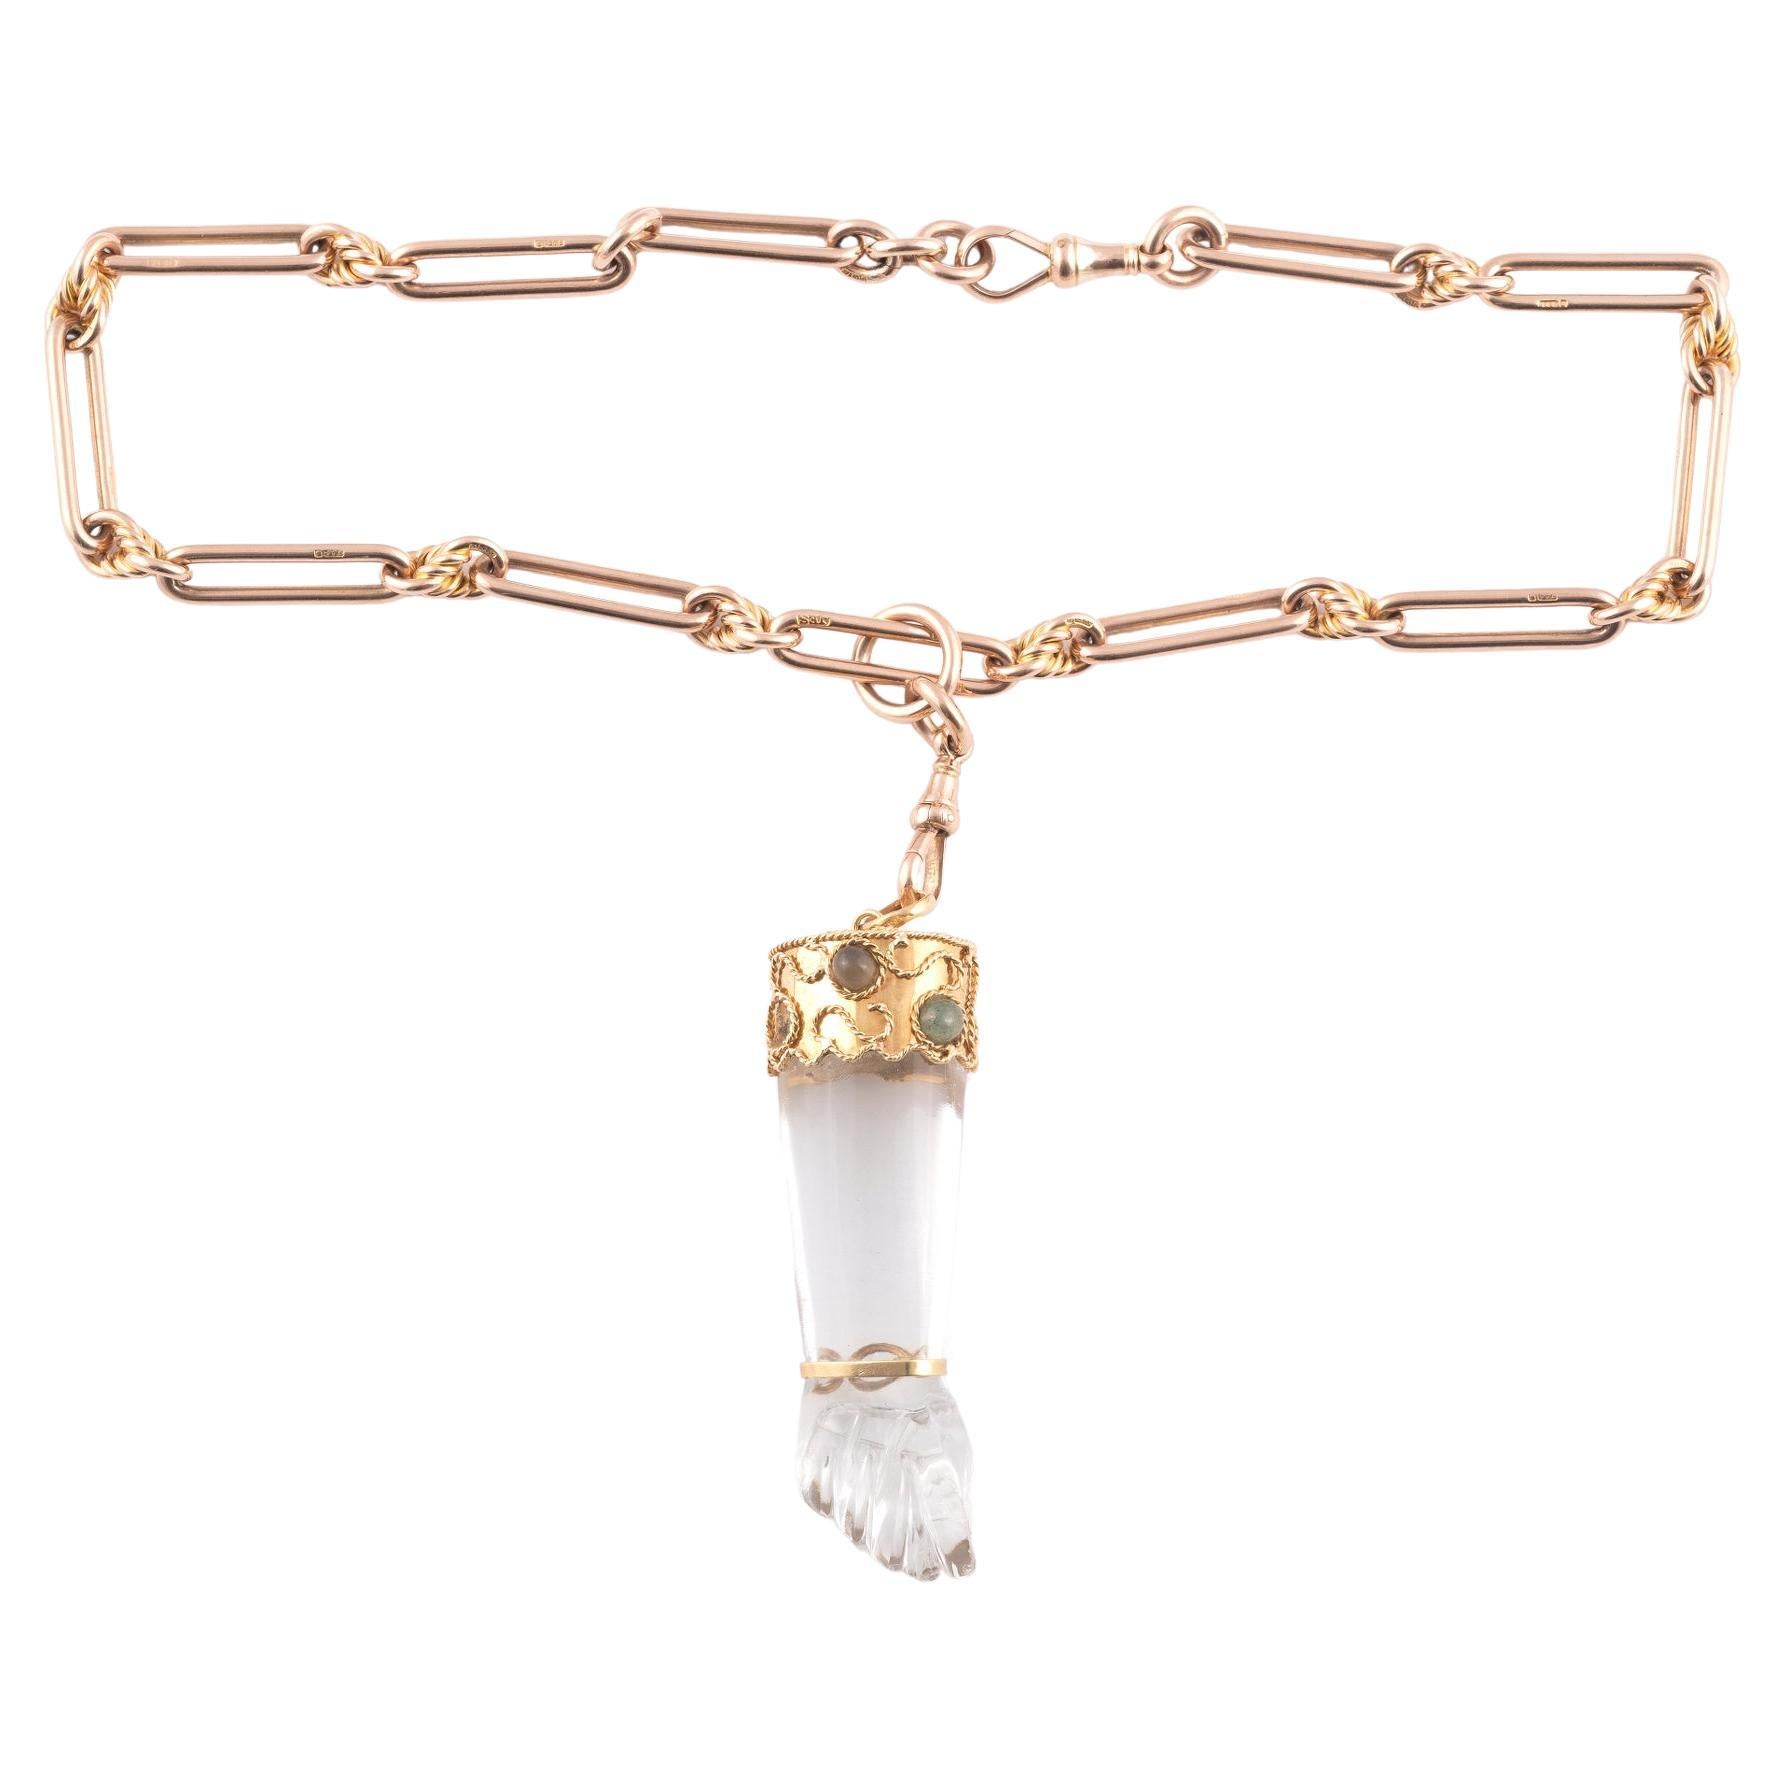 Composed of 9 carat yellow gold fancy links and an crystal hand realistically modelled with the thumb between the first two fingers surmounted by a gold cap embellished with cabochon cut semi-precious stones, length 80mm including loop.
Necklace